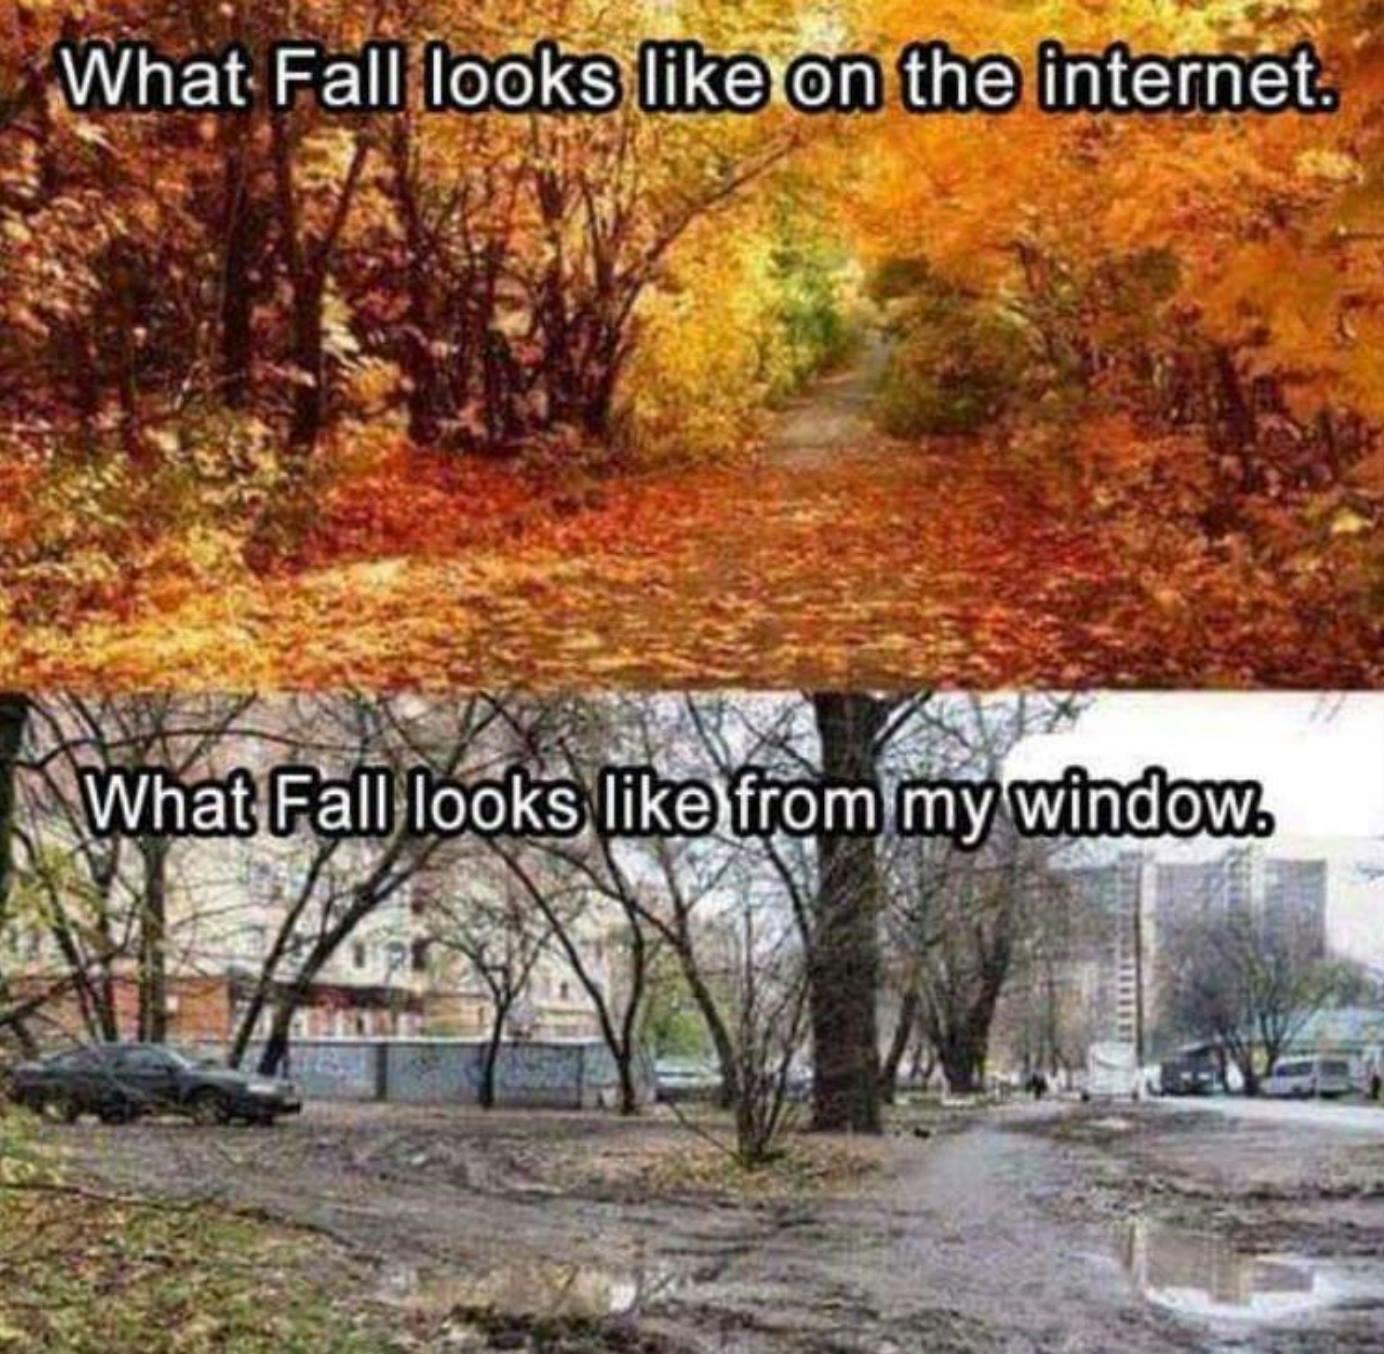 fall looks like on the internet - What Fall looks on the internet. What Fall looks from my window.